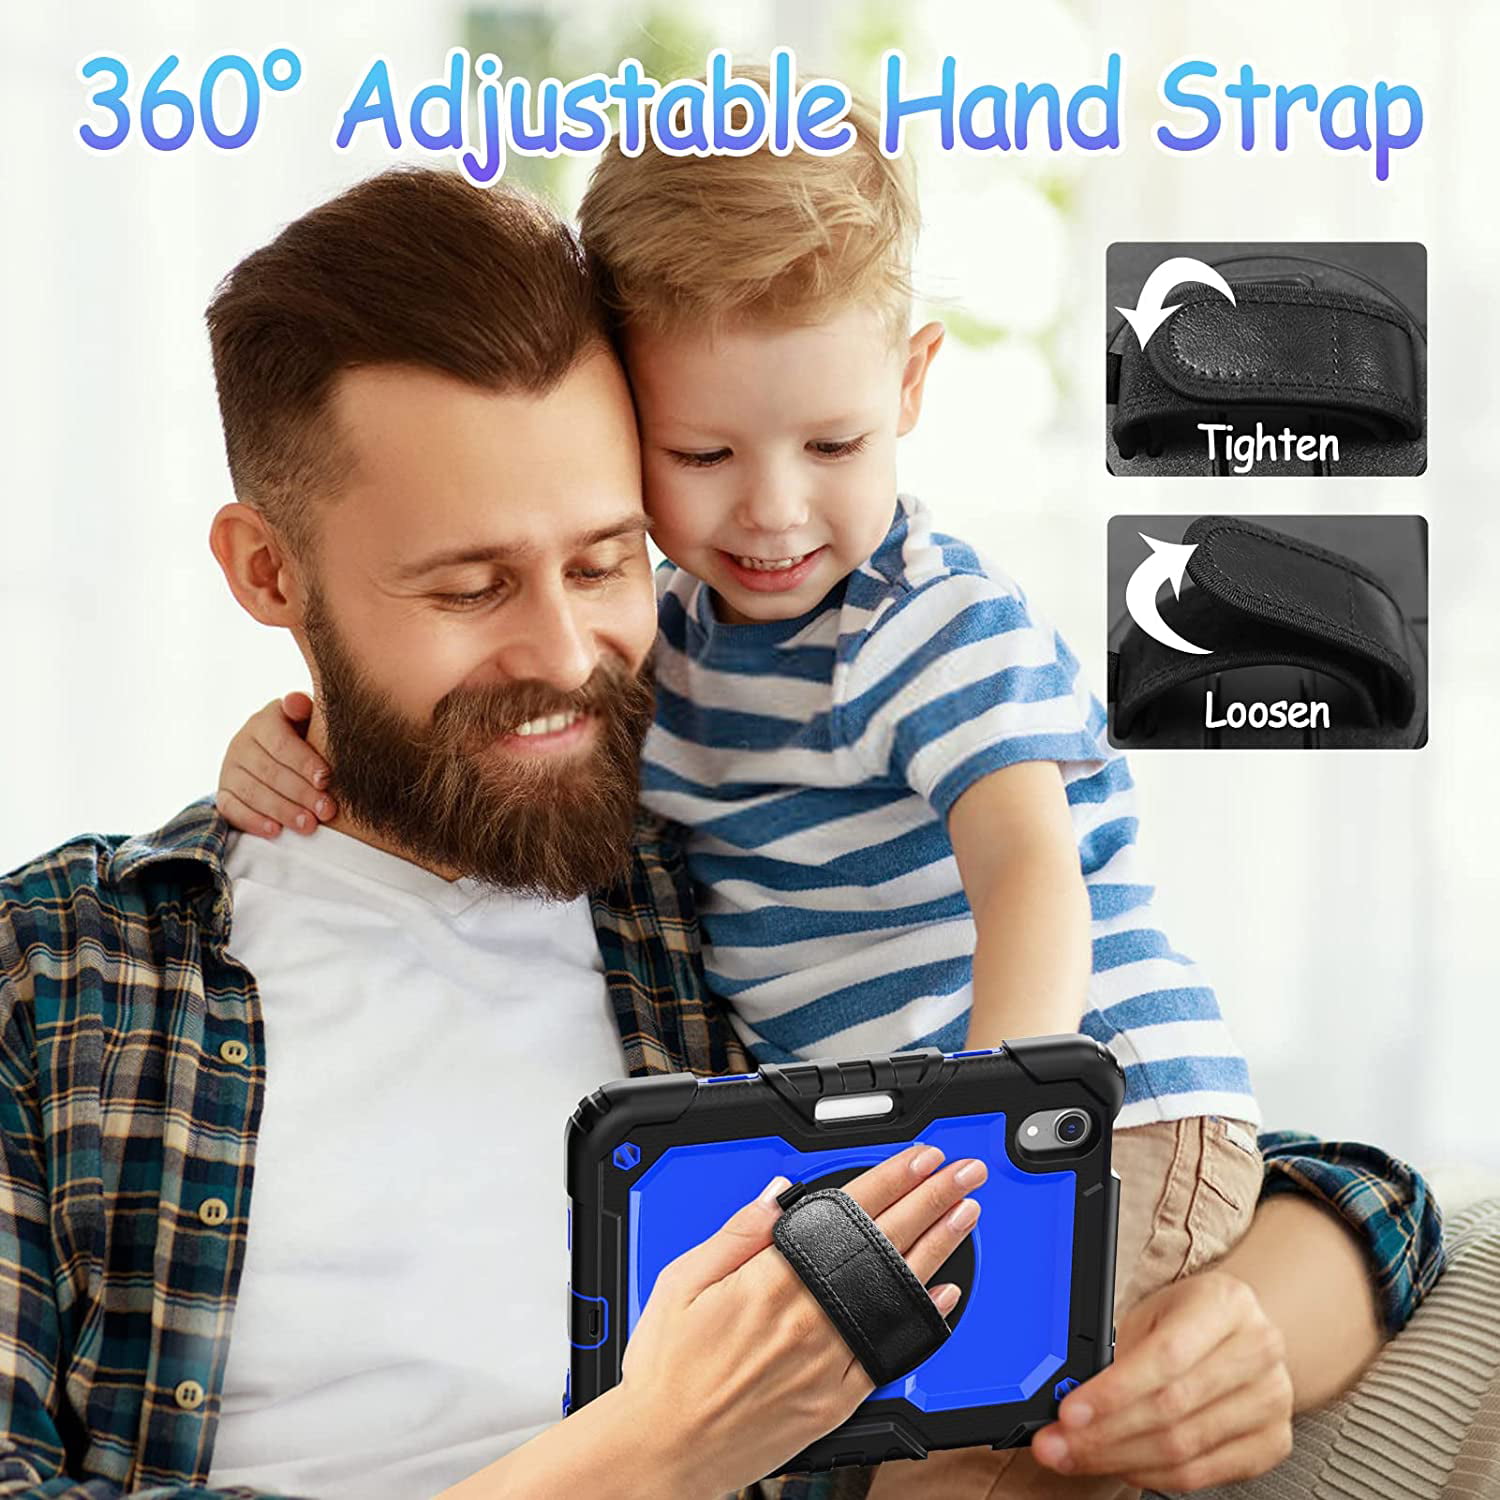 360 Rotating Stand/Hand Strap iPad Mini 6 Case 2021 with Pencil Holder Screen Protector Black + Shoulder Strap HXCASEAC Shockproof Full Body Protective Case for iPad Mini 6th Generation 8.3 inch 